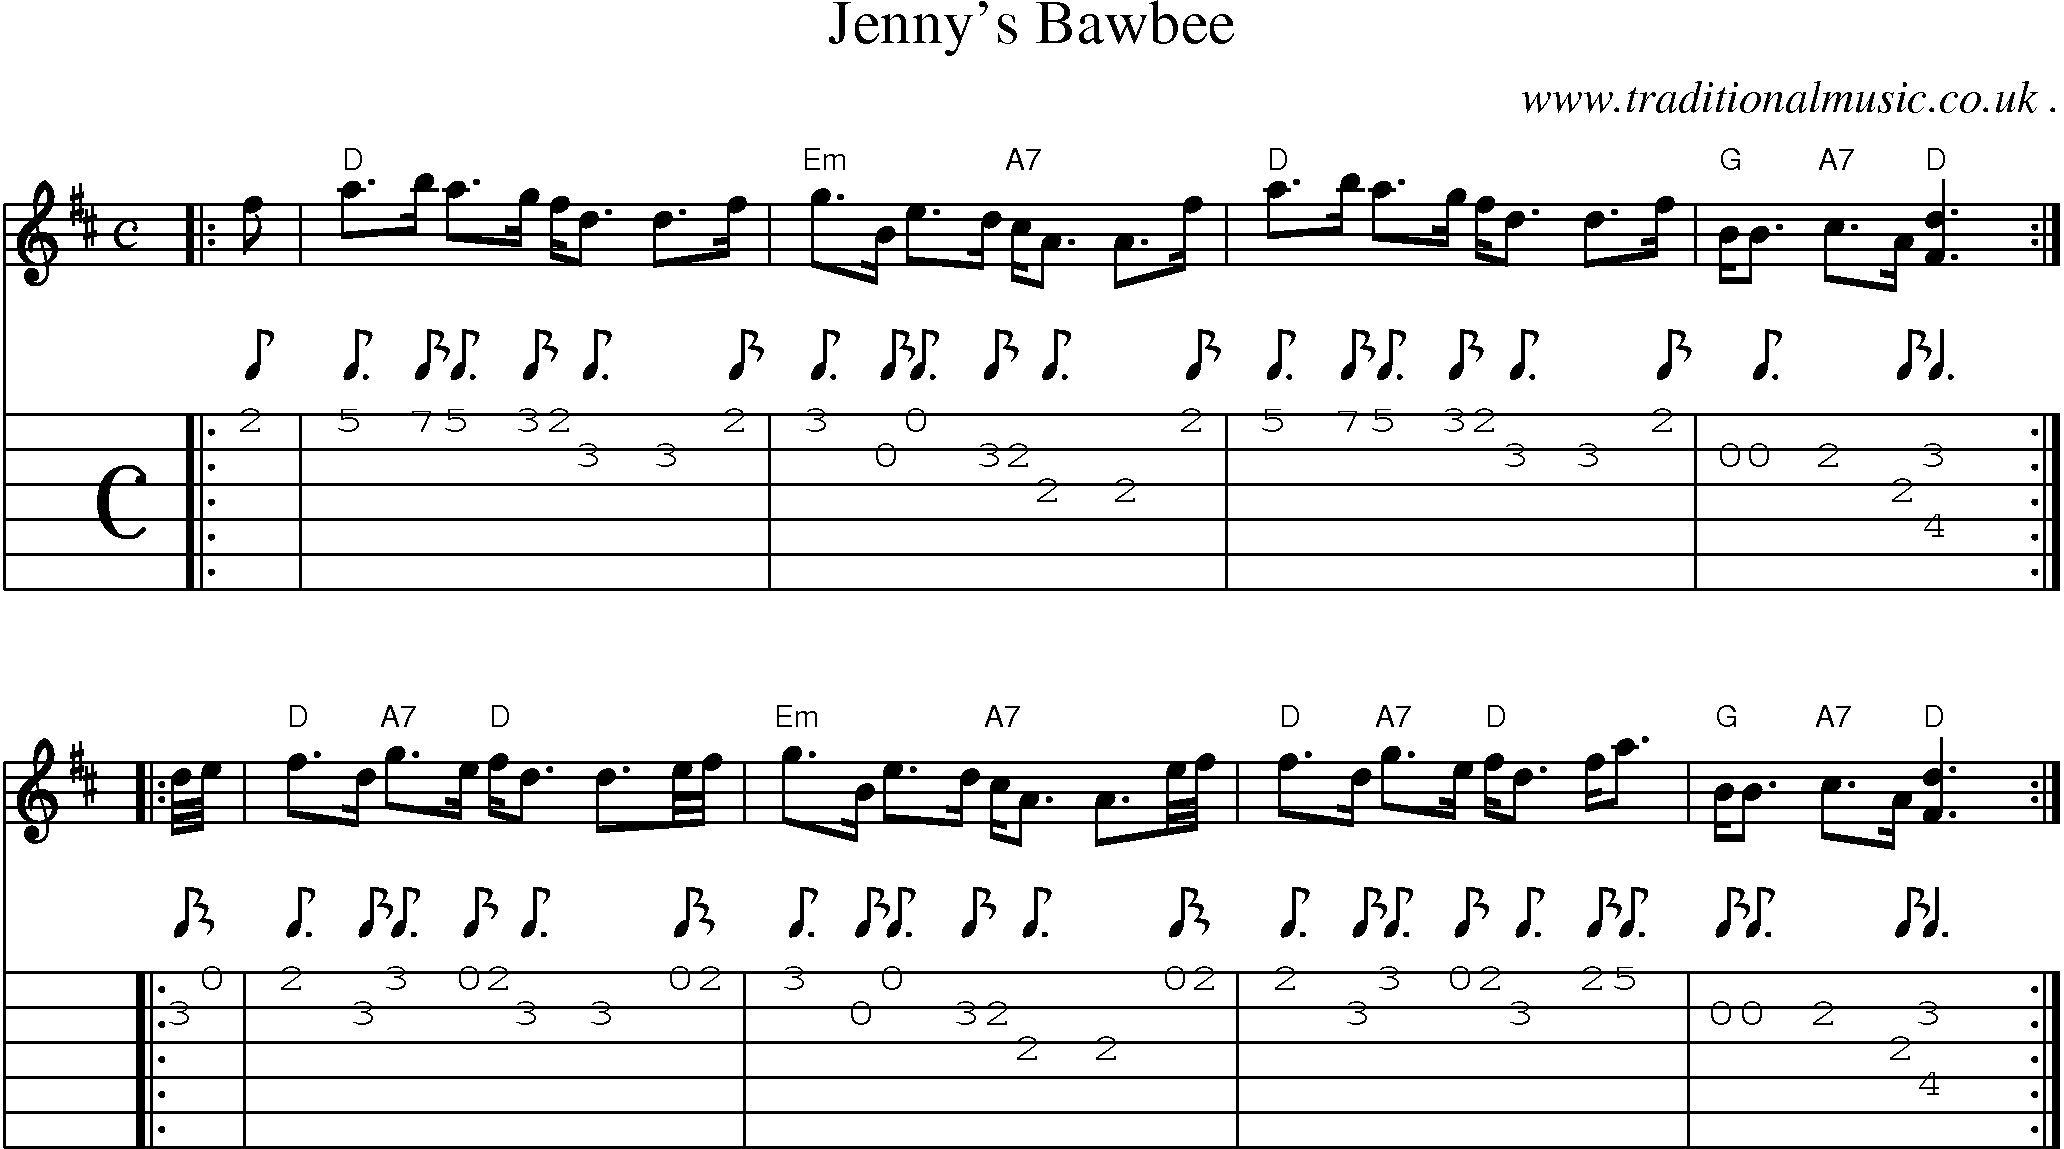 Sheet-music  score, Chords and Guitar Tabs for Jennys Bawbee